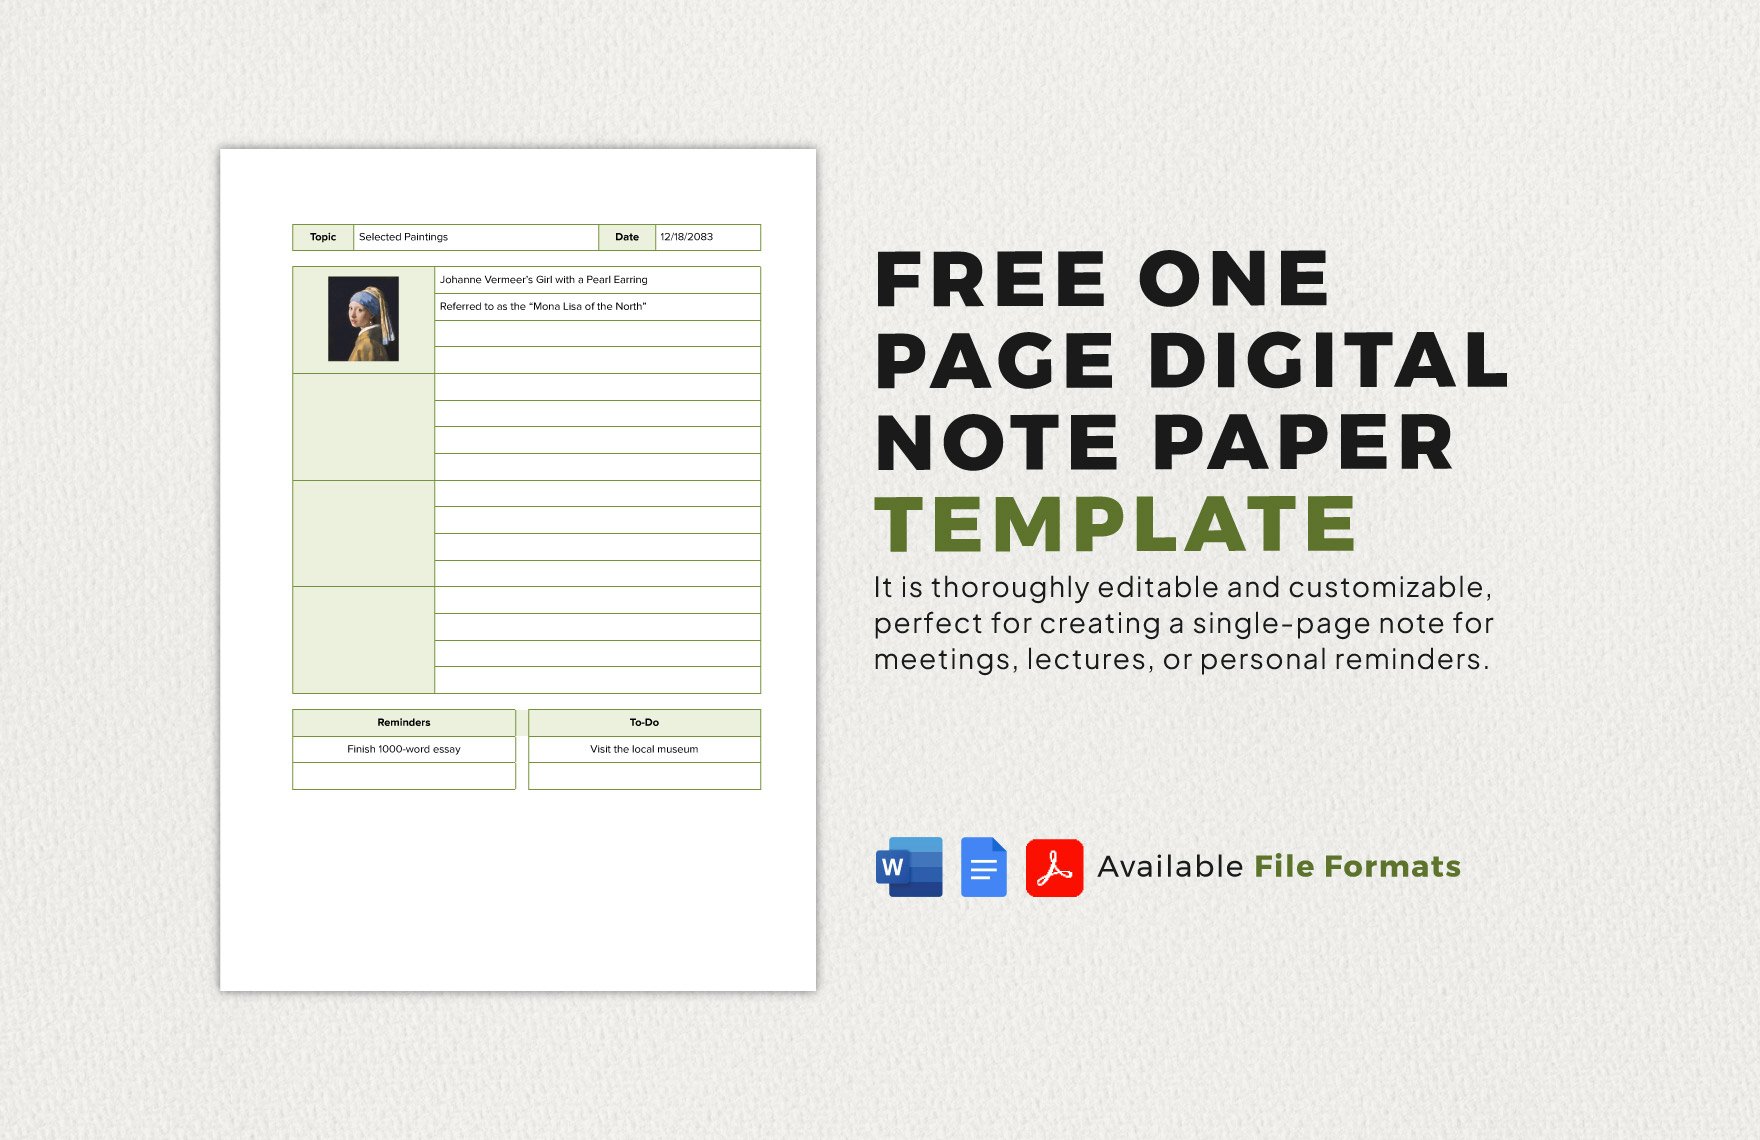 One Page Digital Note Paper Template